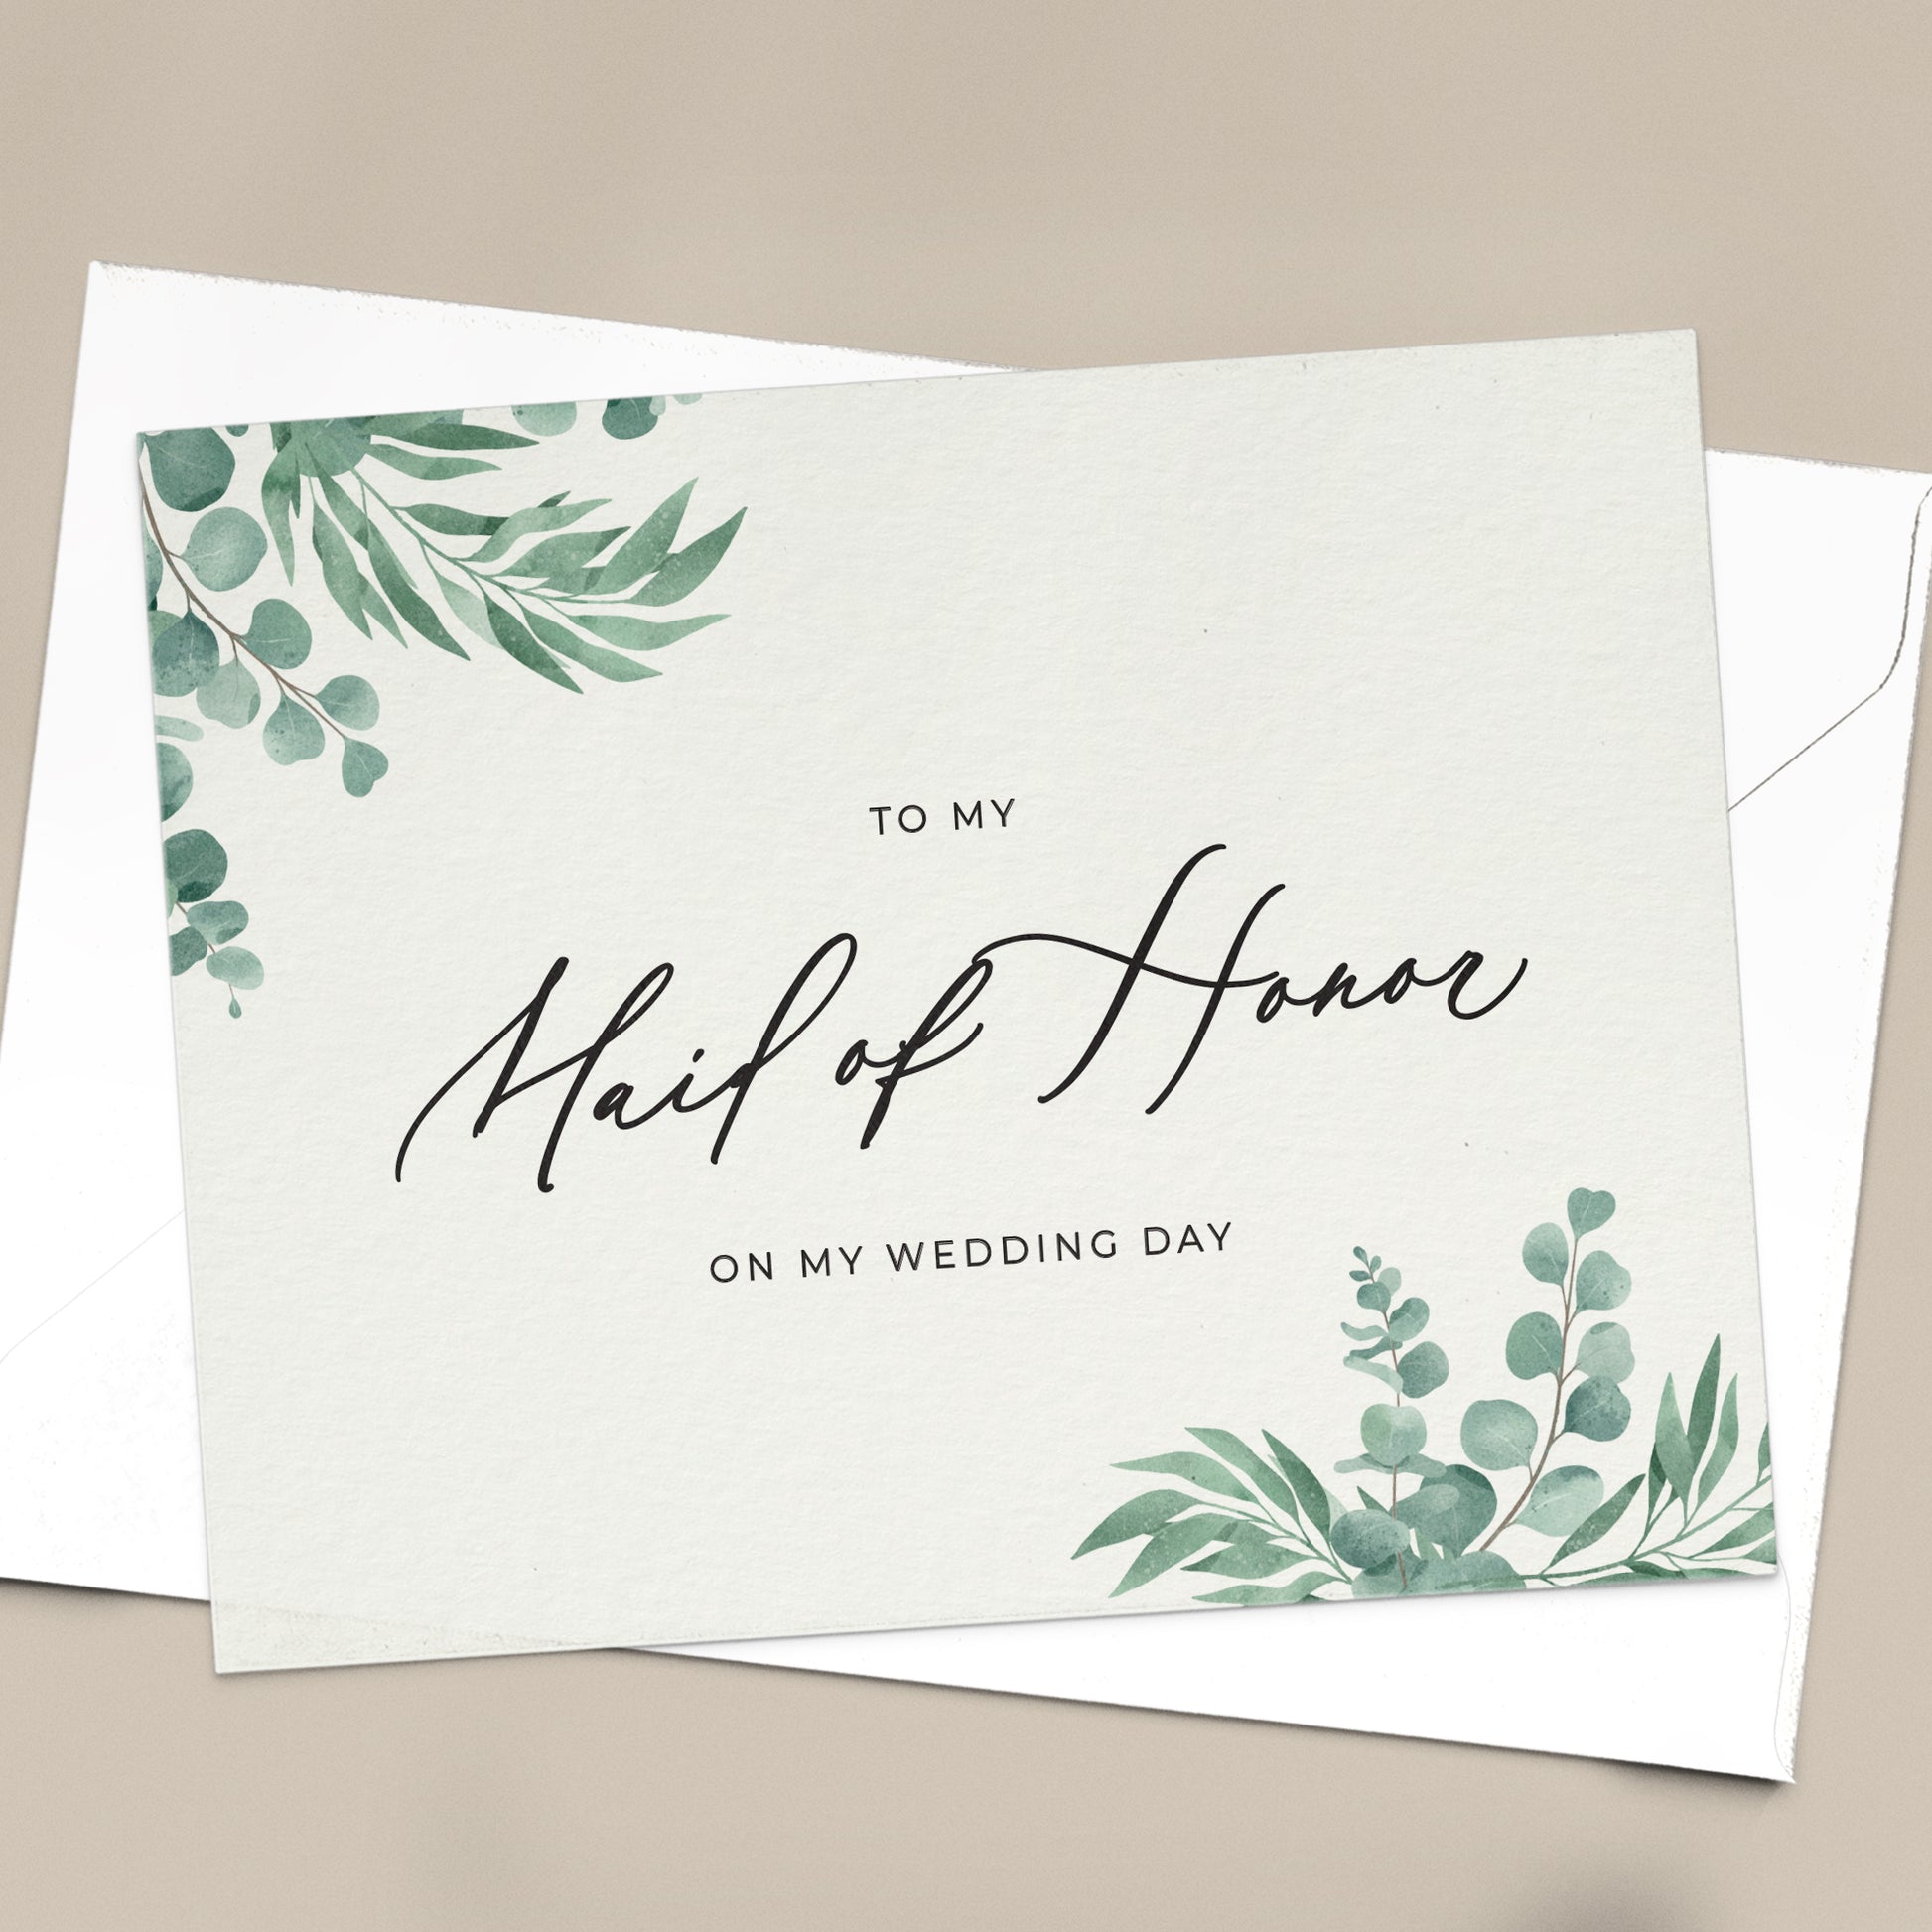 To my maid of honor on my wedding day note card in greenery design with eucalyptus leaves and calligraphy font from XOXOKristen.